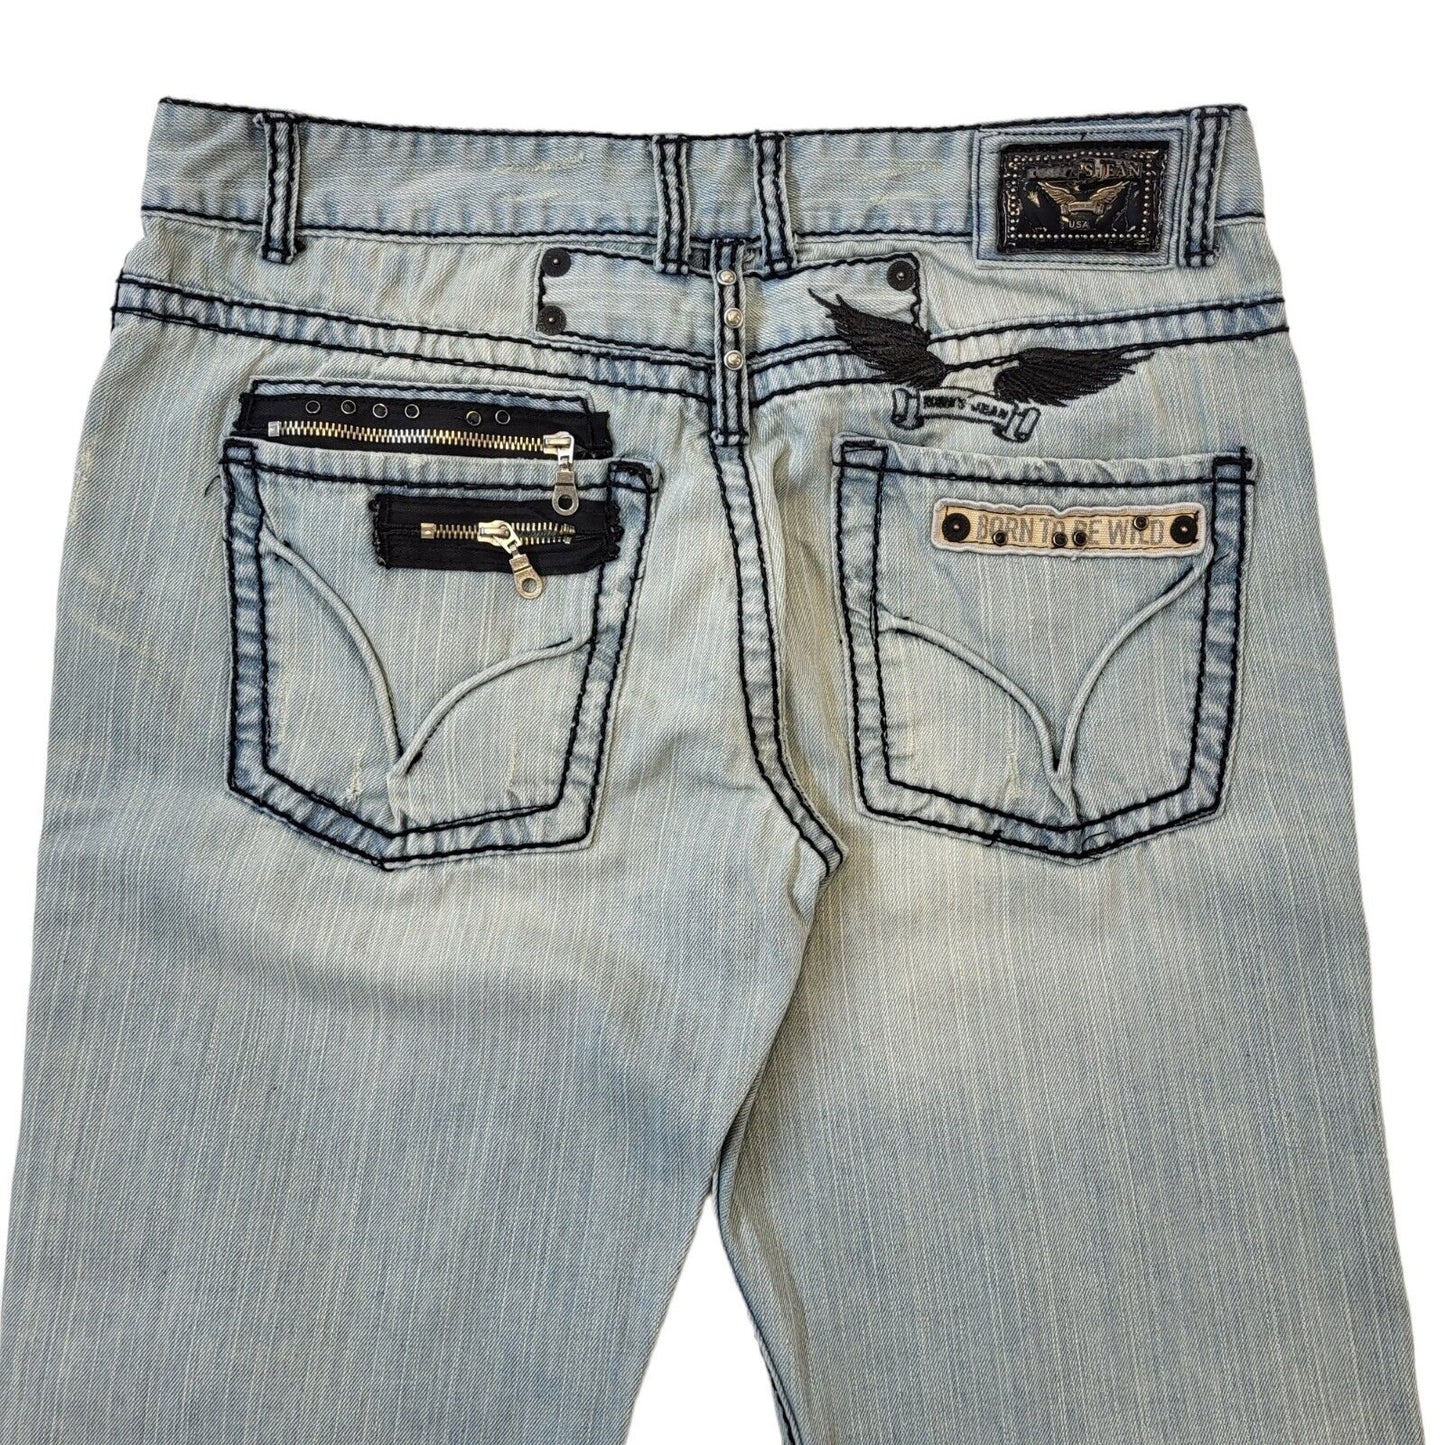 Born to be Wild Jeans (18)